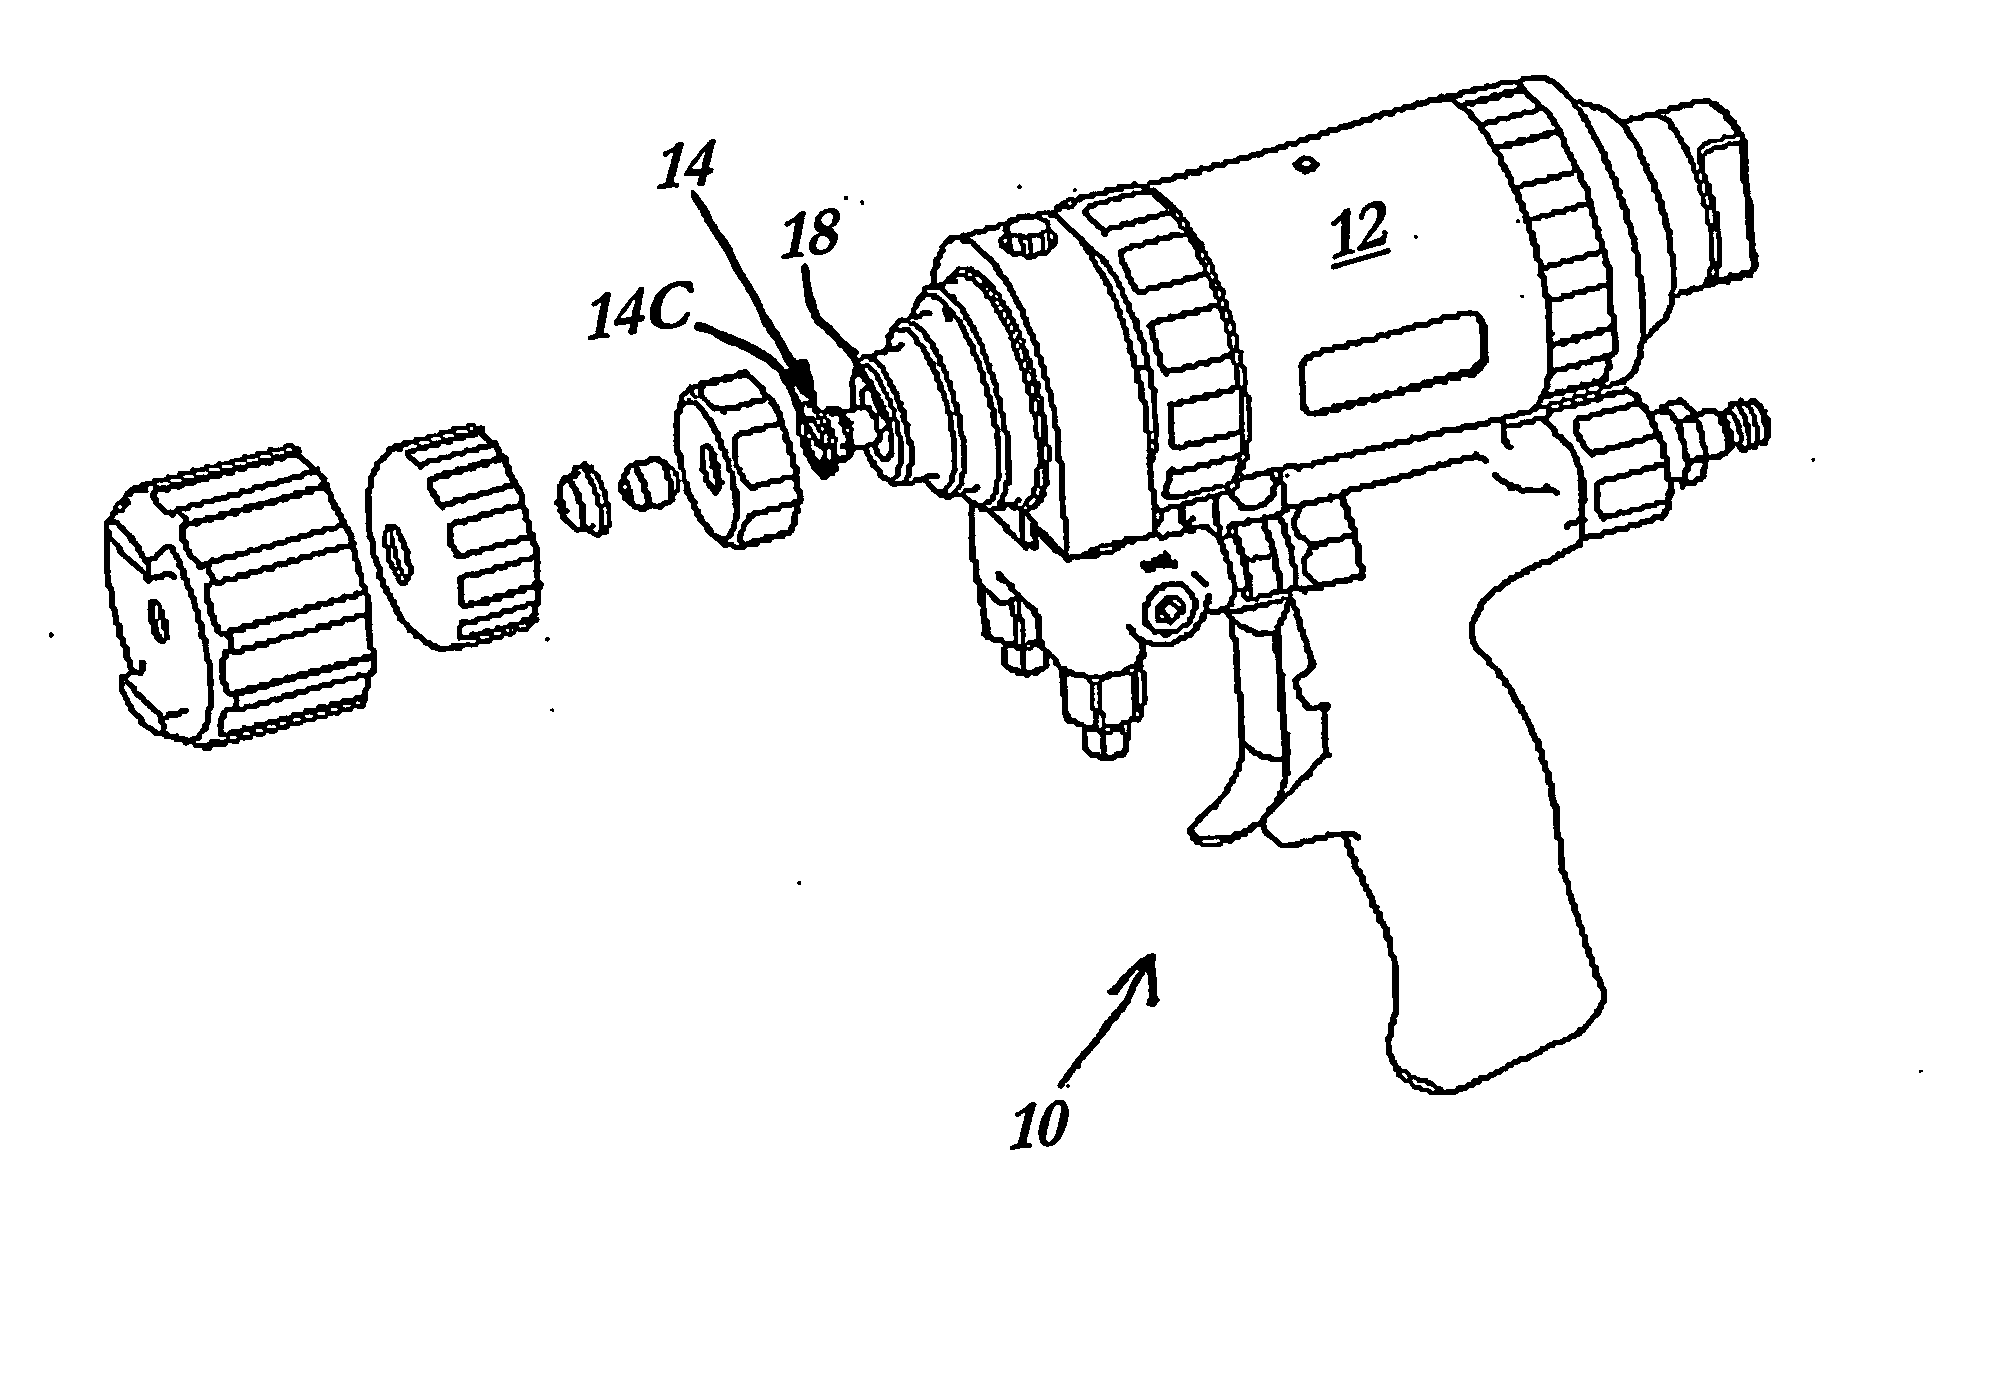 Plural component spray gun for fast setting materials